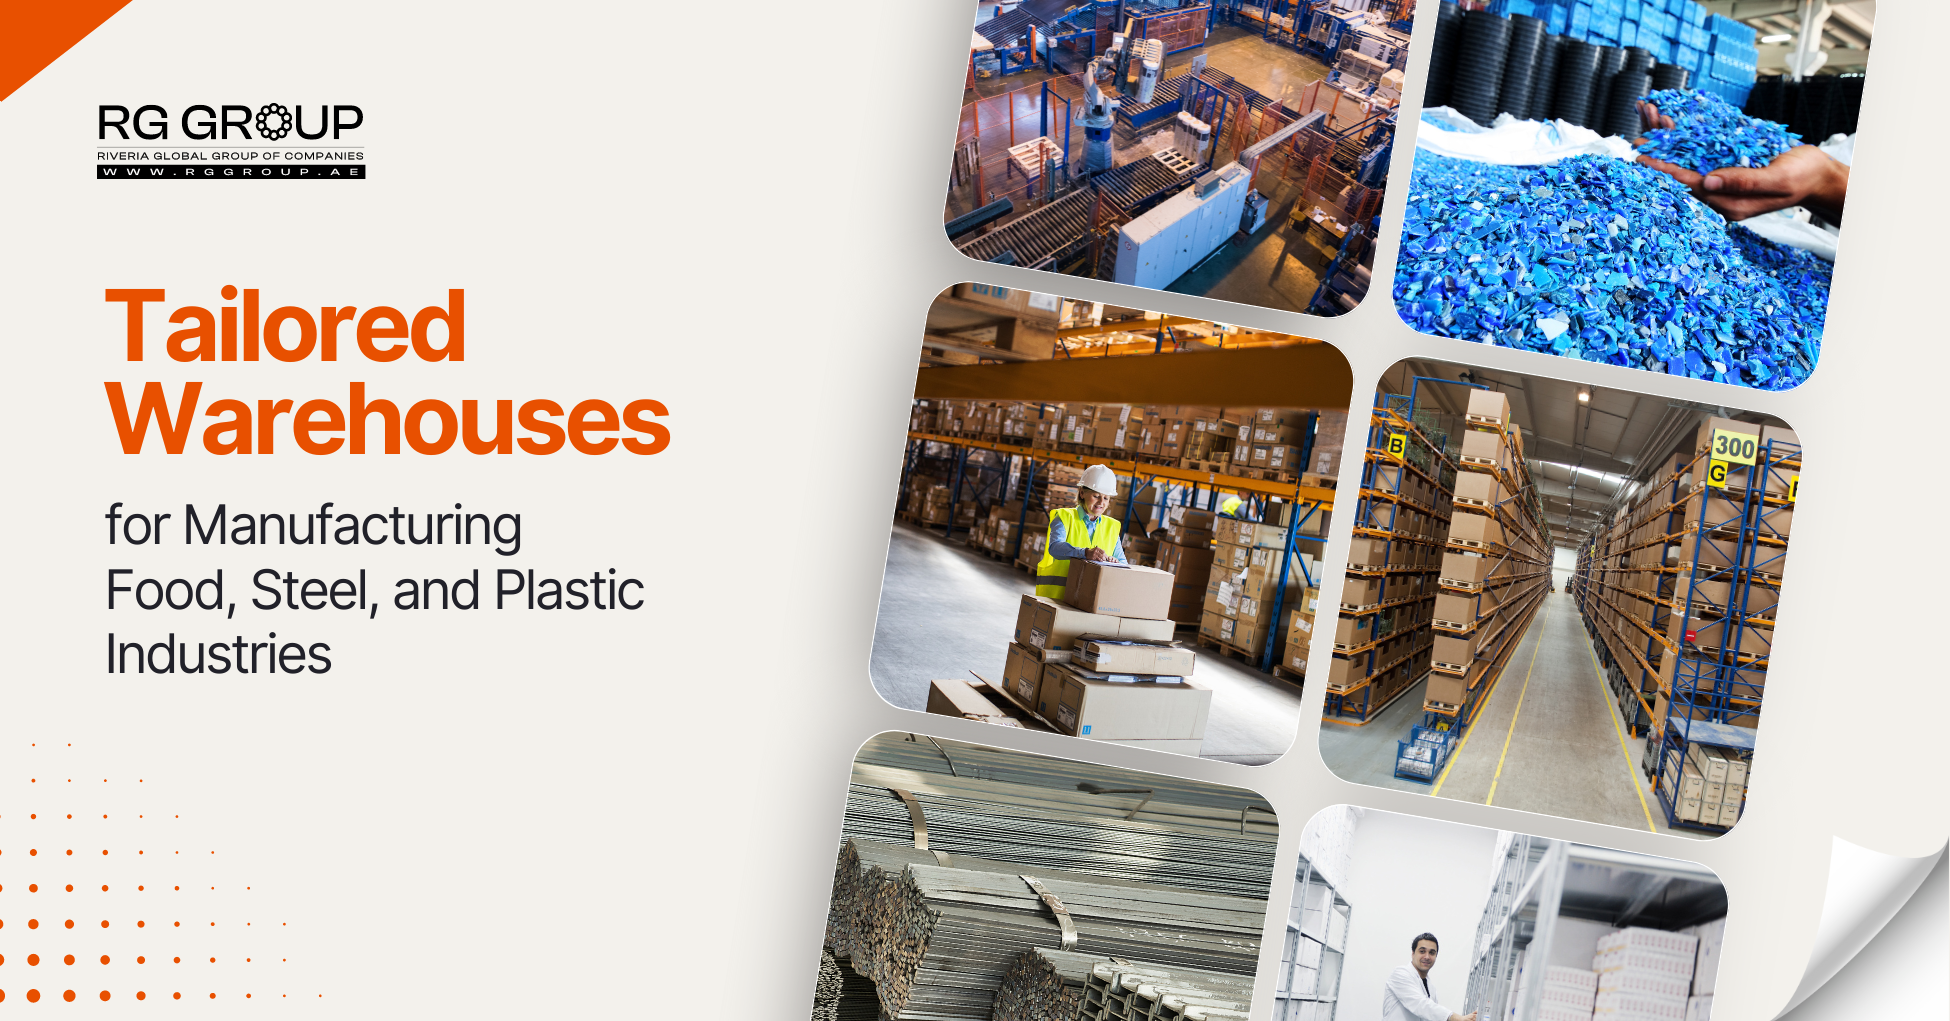 RG Group’s: Tailored Warehouses for Manufacturing, Food, Steel, and Plastic Industries